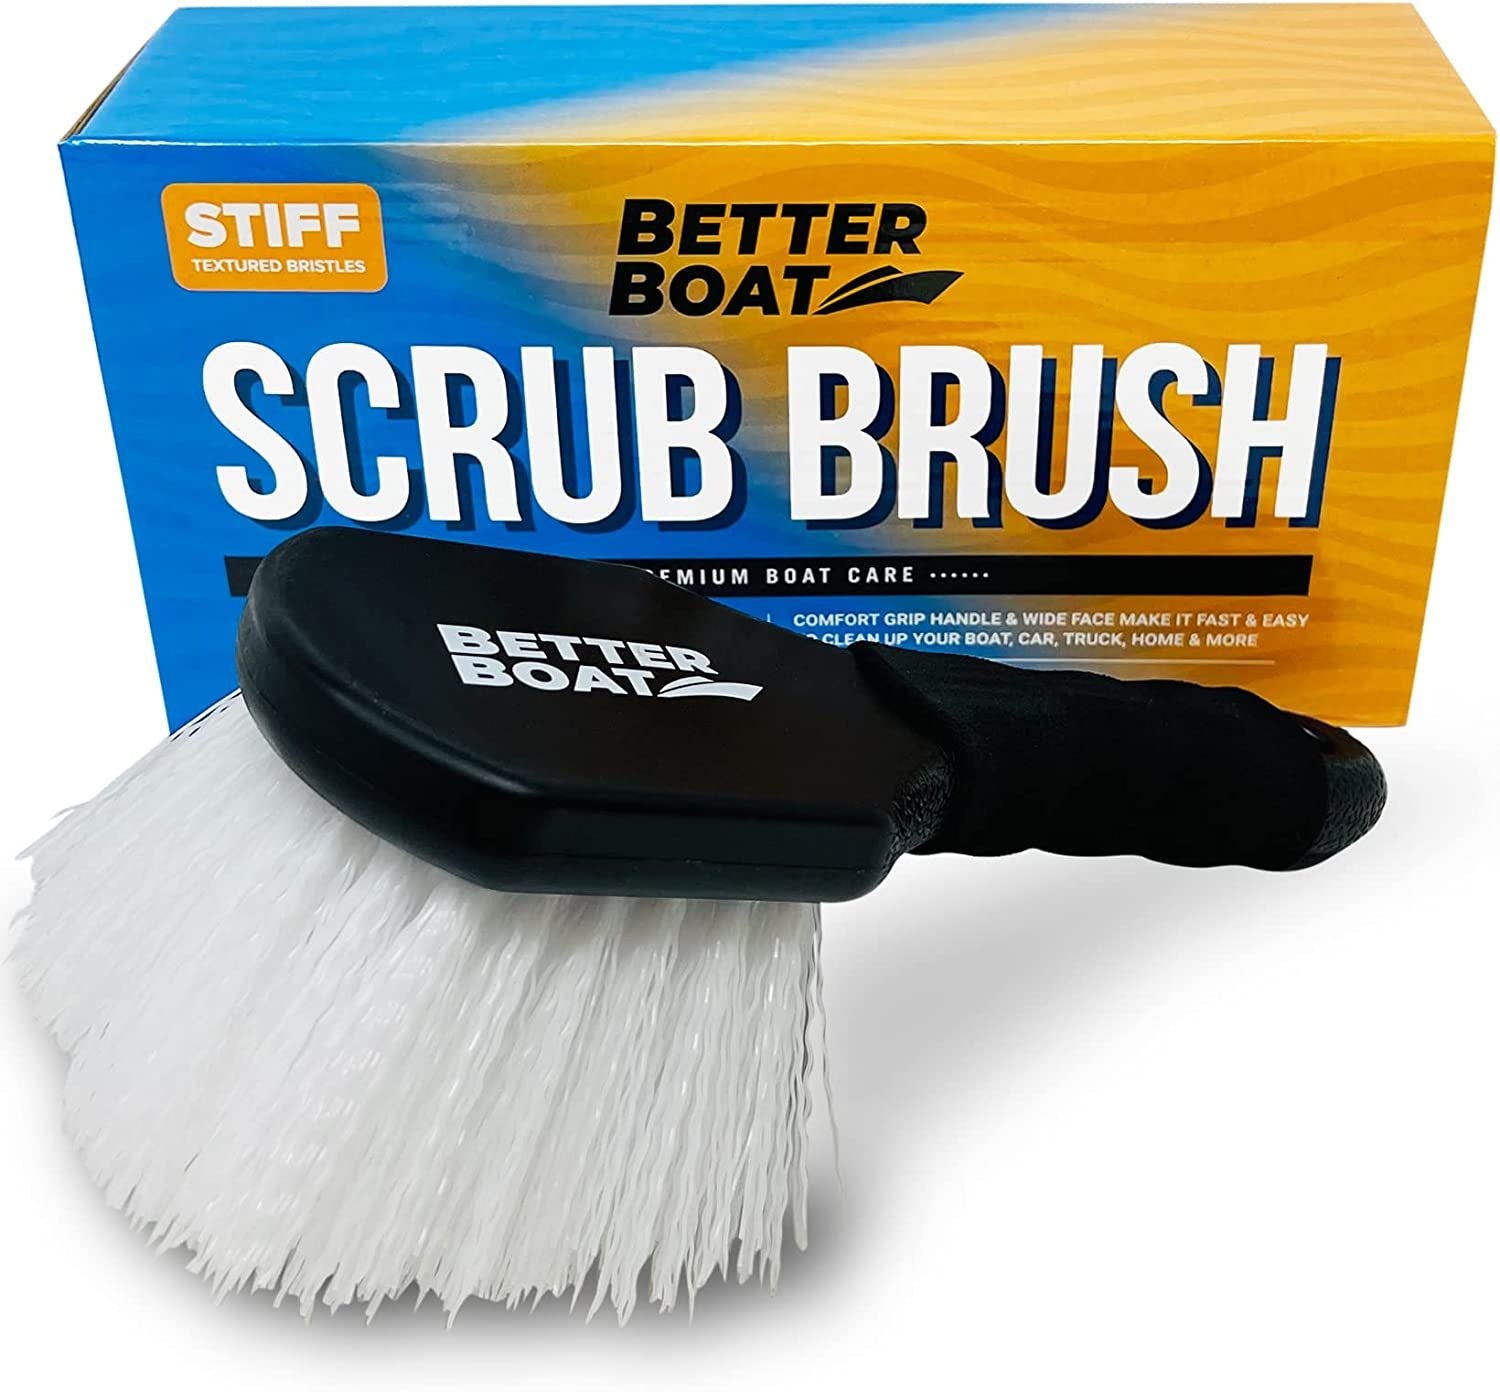 Stiff Hand Scrub Brushes for Cleaning Heavy Duty Utility Outdoor Scrub Brush with Handle All Purpose Boat & Car Small Cleaning Brush & Bathroom Bathtub Shower Tub Wheel & Tire Scrubber -Short Handled